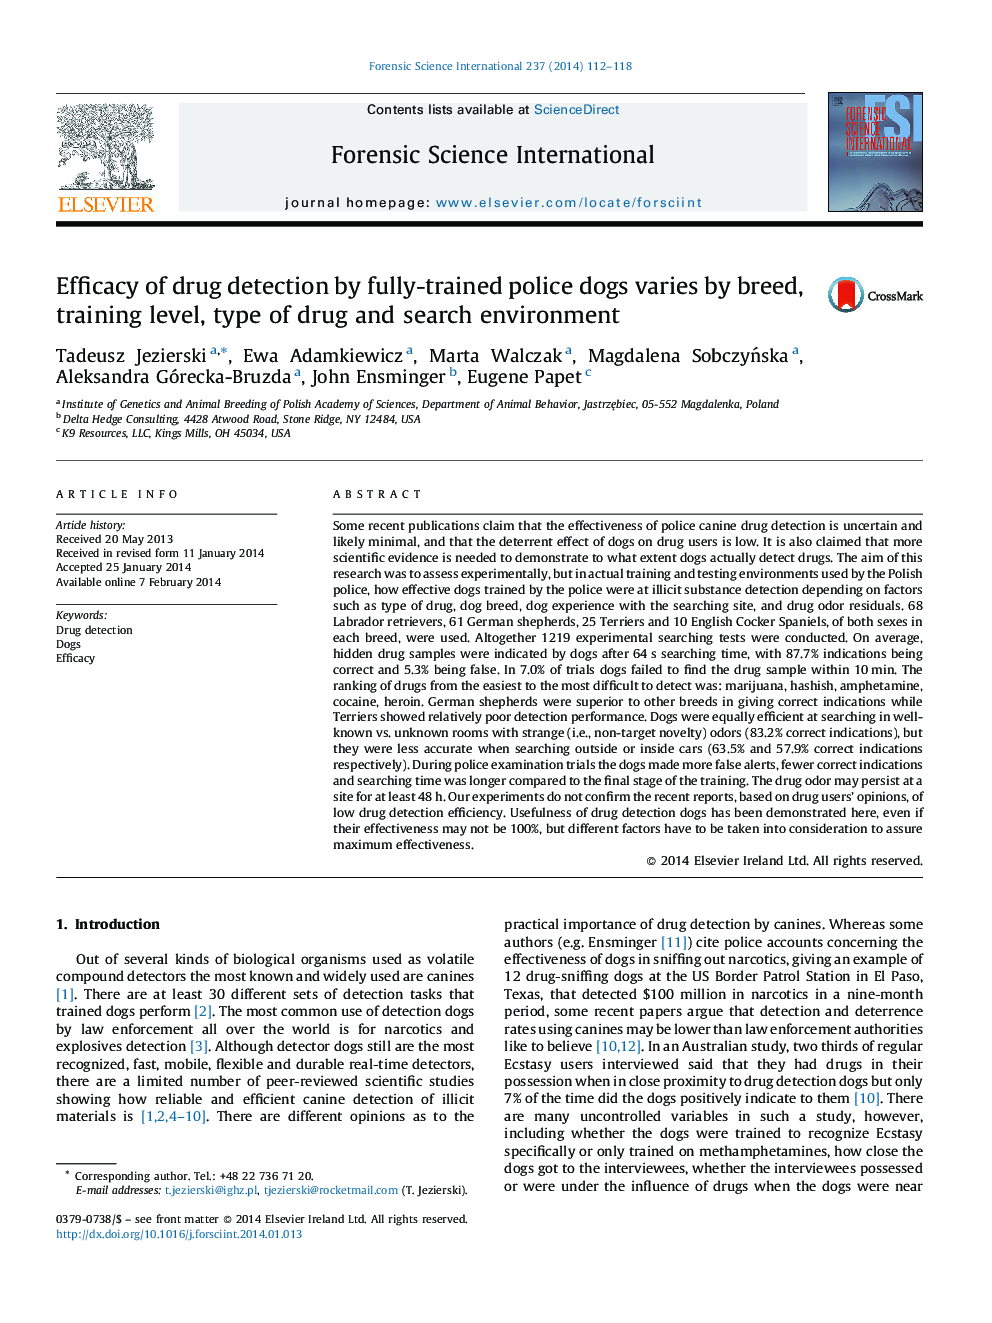 Efficacy of drug detection by fully-trained police dogs varies by breed, training level, type of drug and search environment